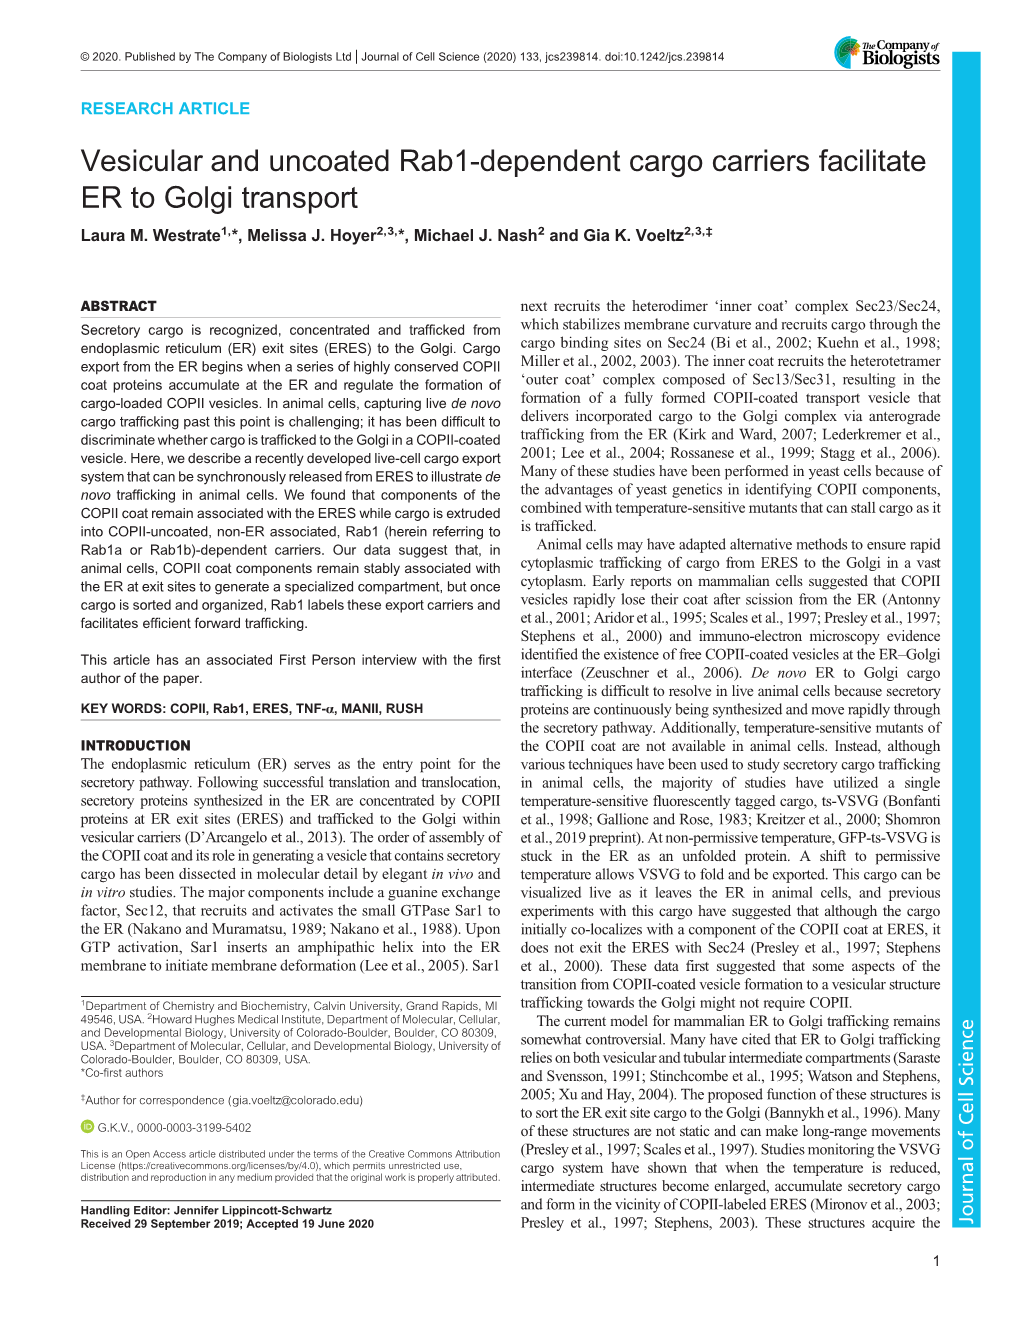 Vesicular and Uncoated Rab1-Dependent Cargo Carriers Facilitate ER to Golgi Transport Laura M